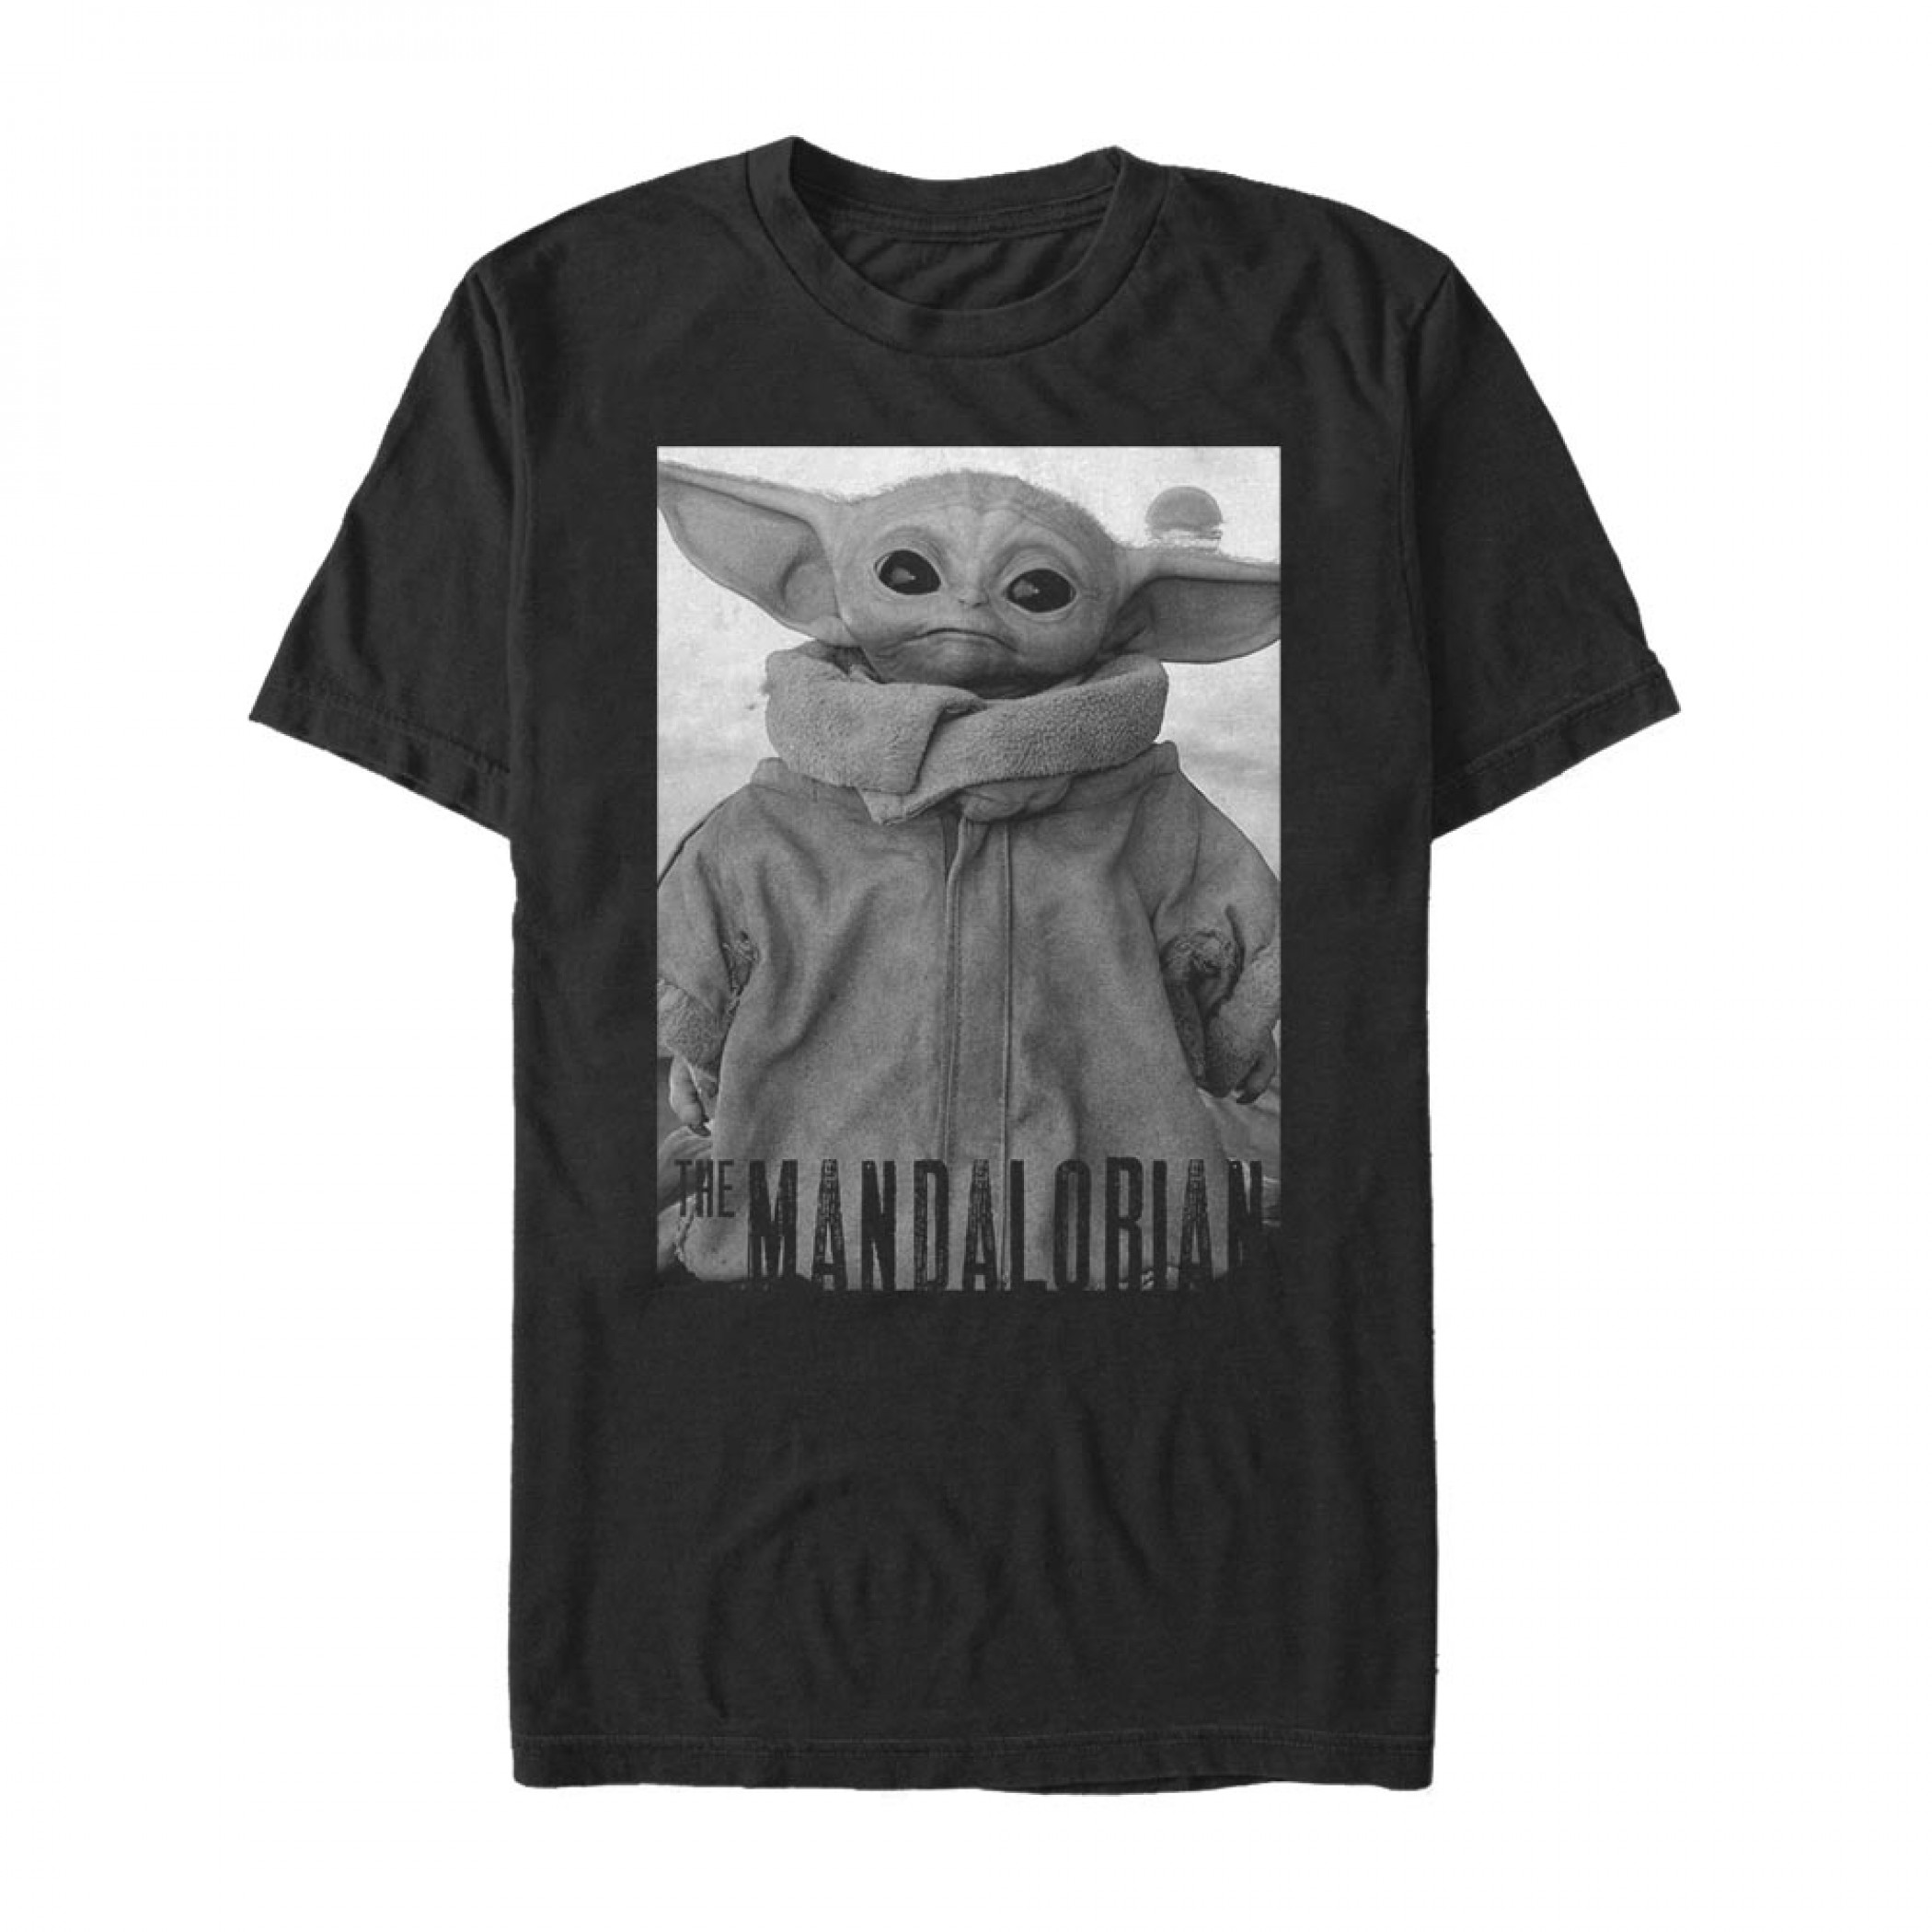 Star Wars The Mandalorian The Child Grayscale Pose T-Shirt